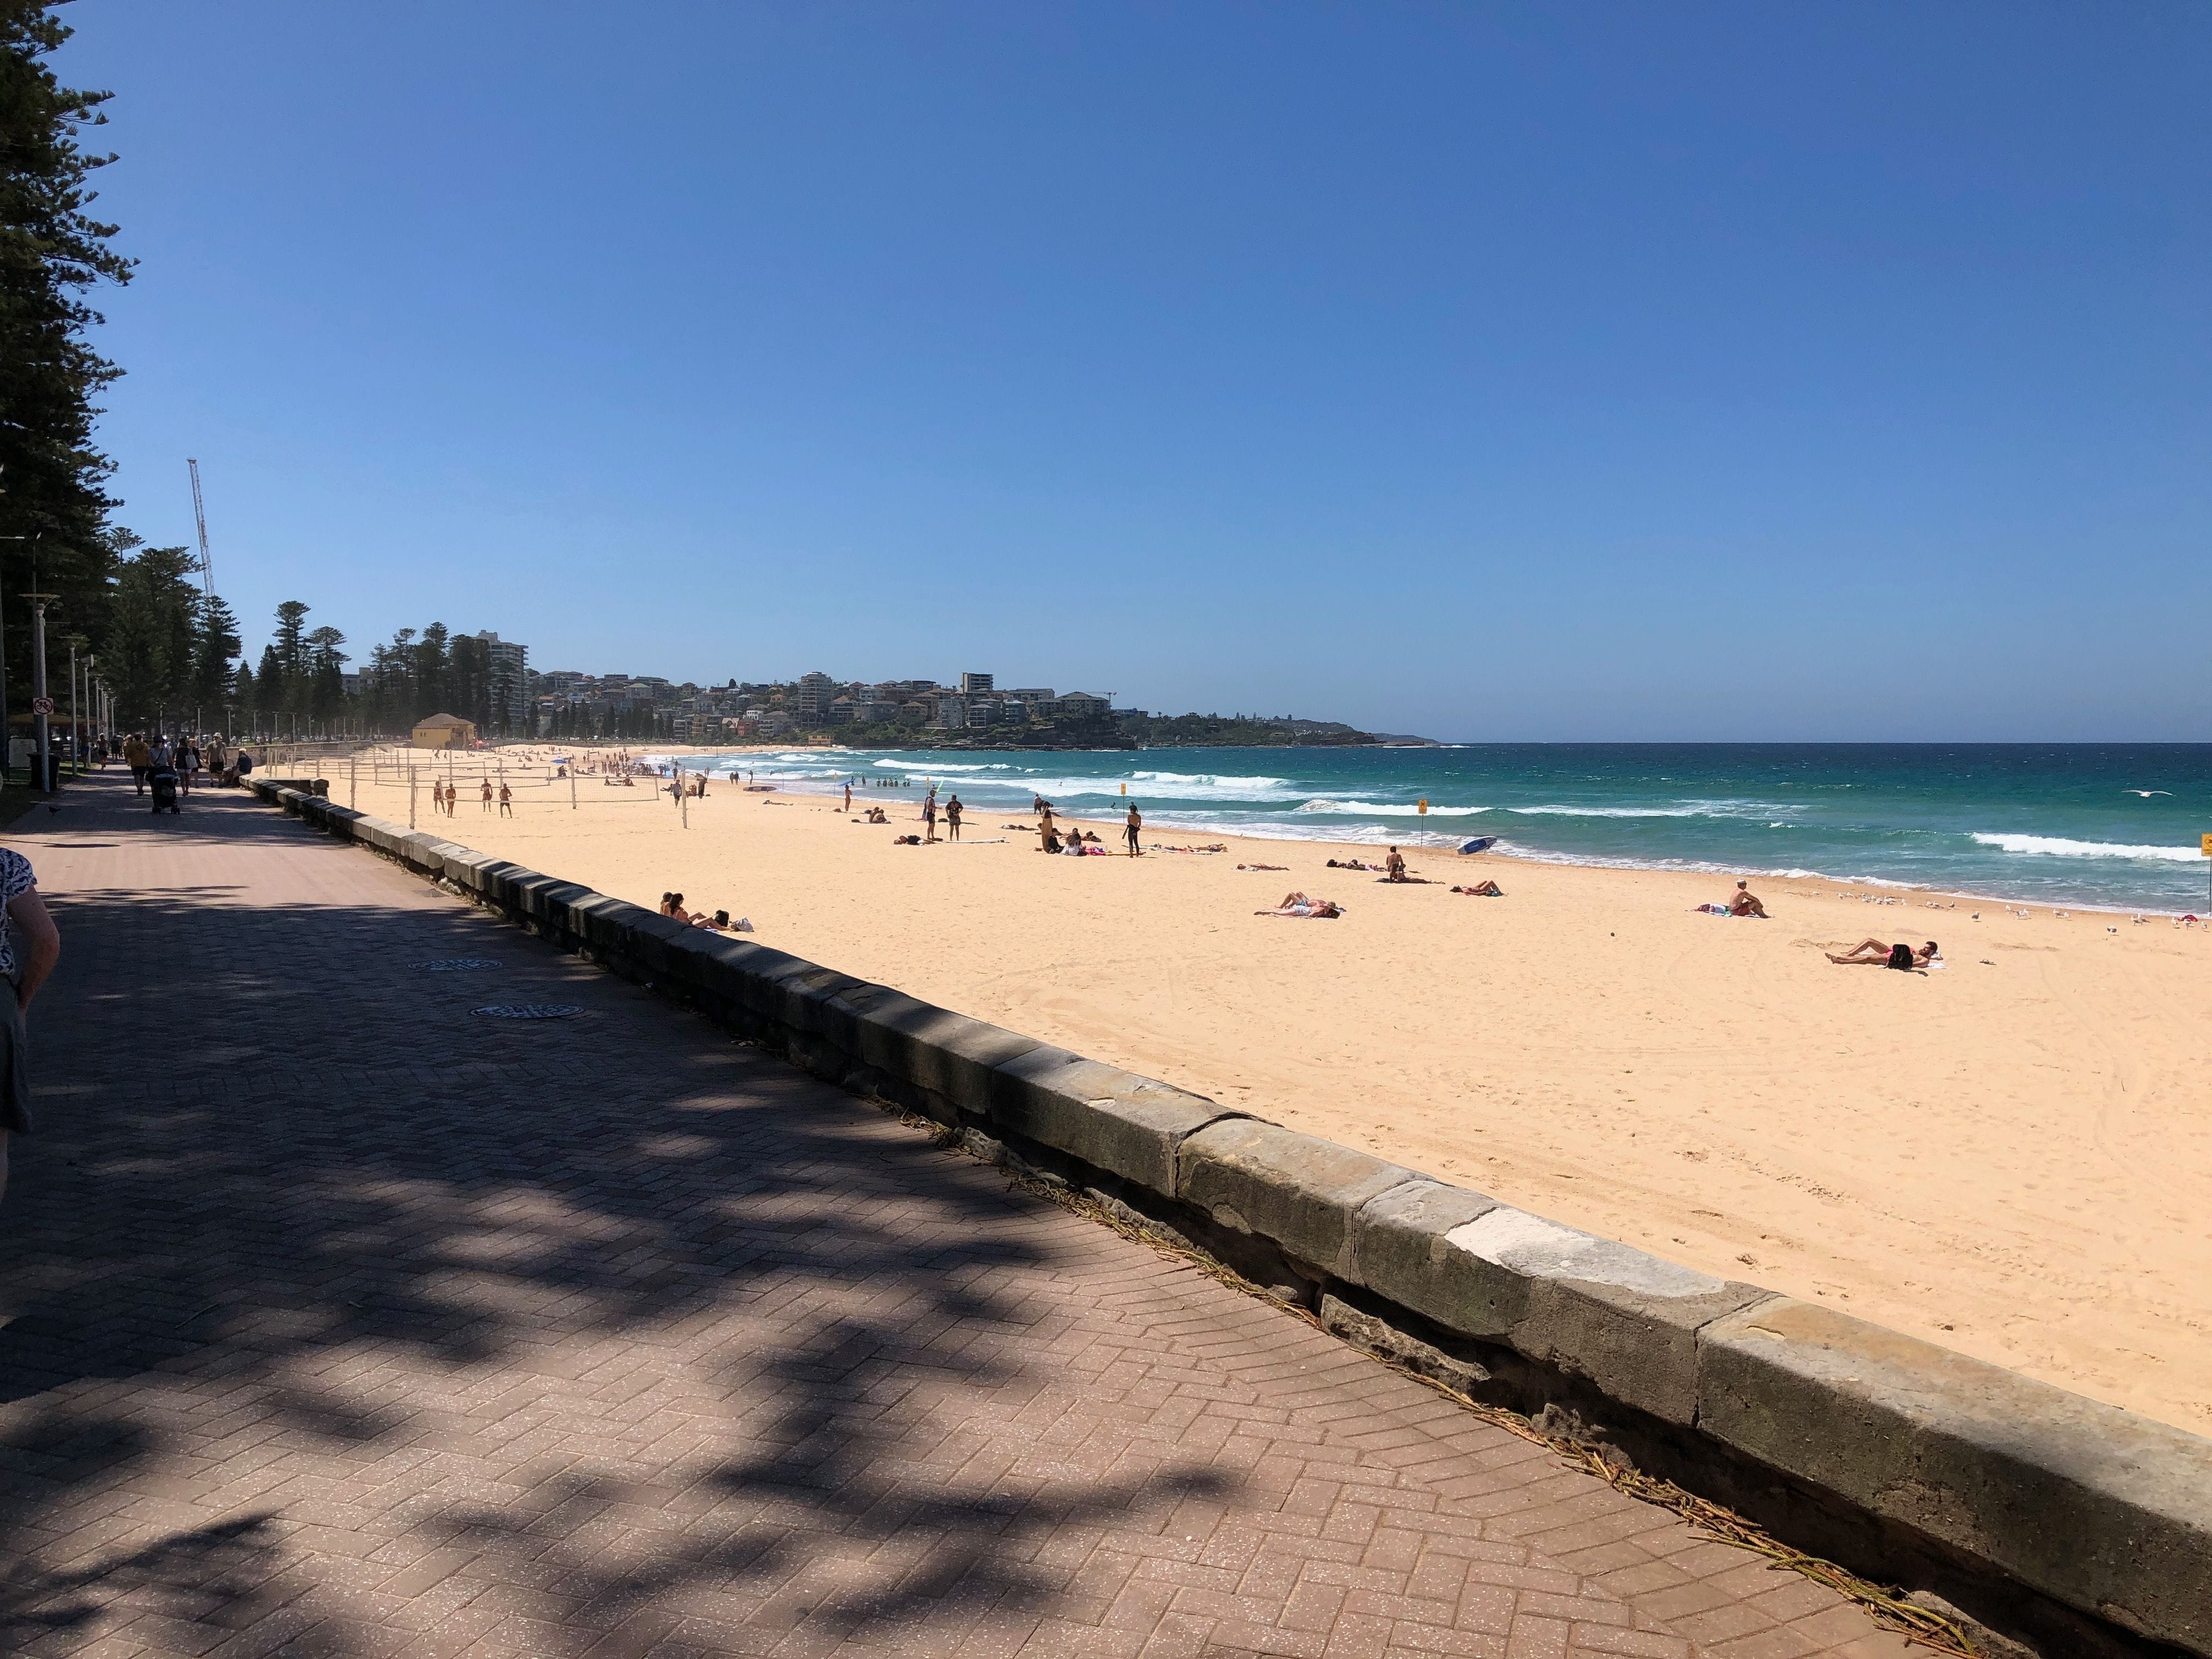 Northern Beaches Public Day Tour febuary 2019 Image -5c649636ec75a